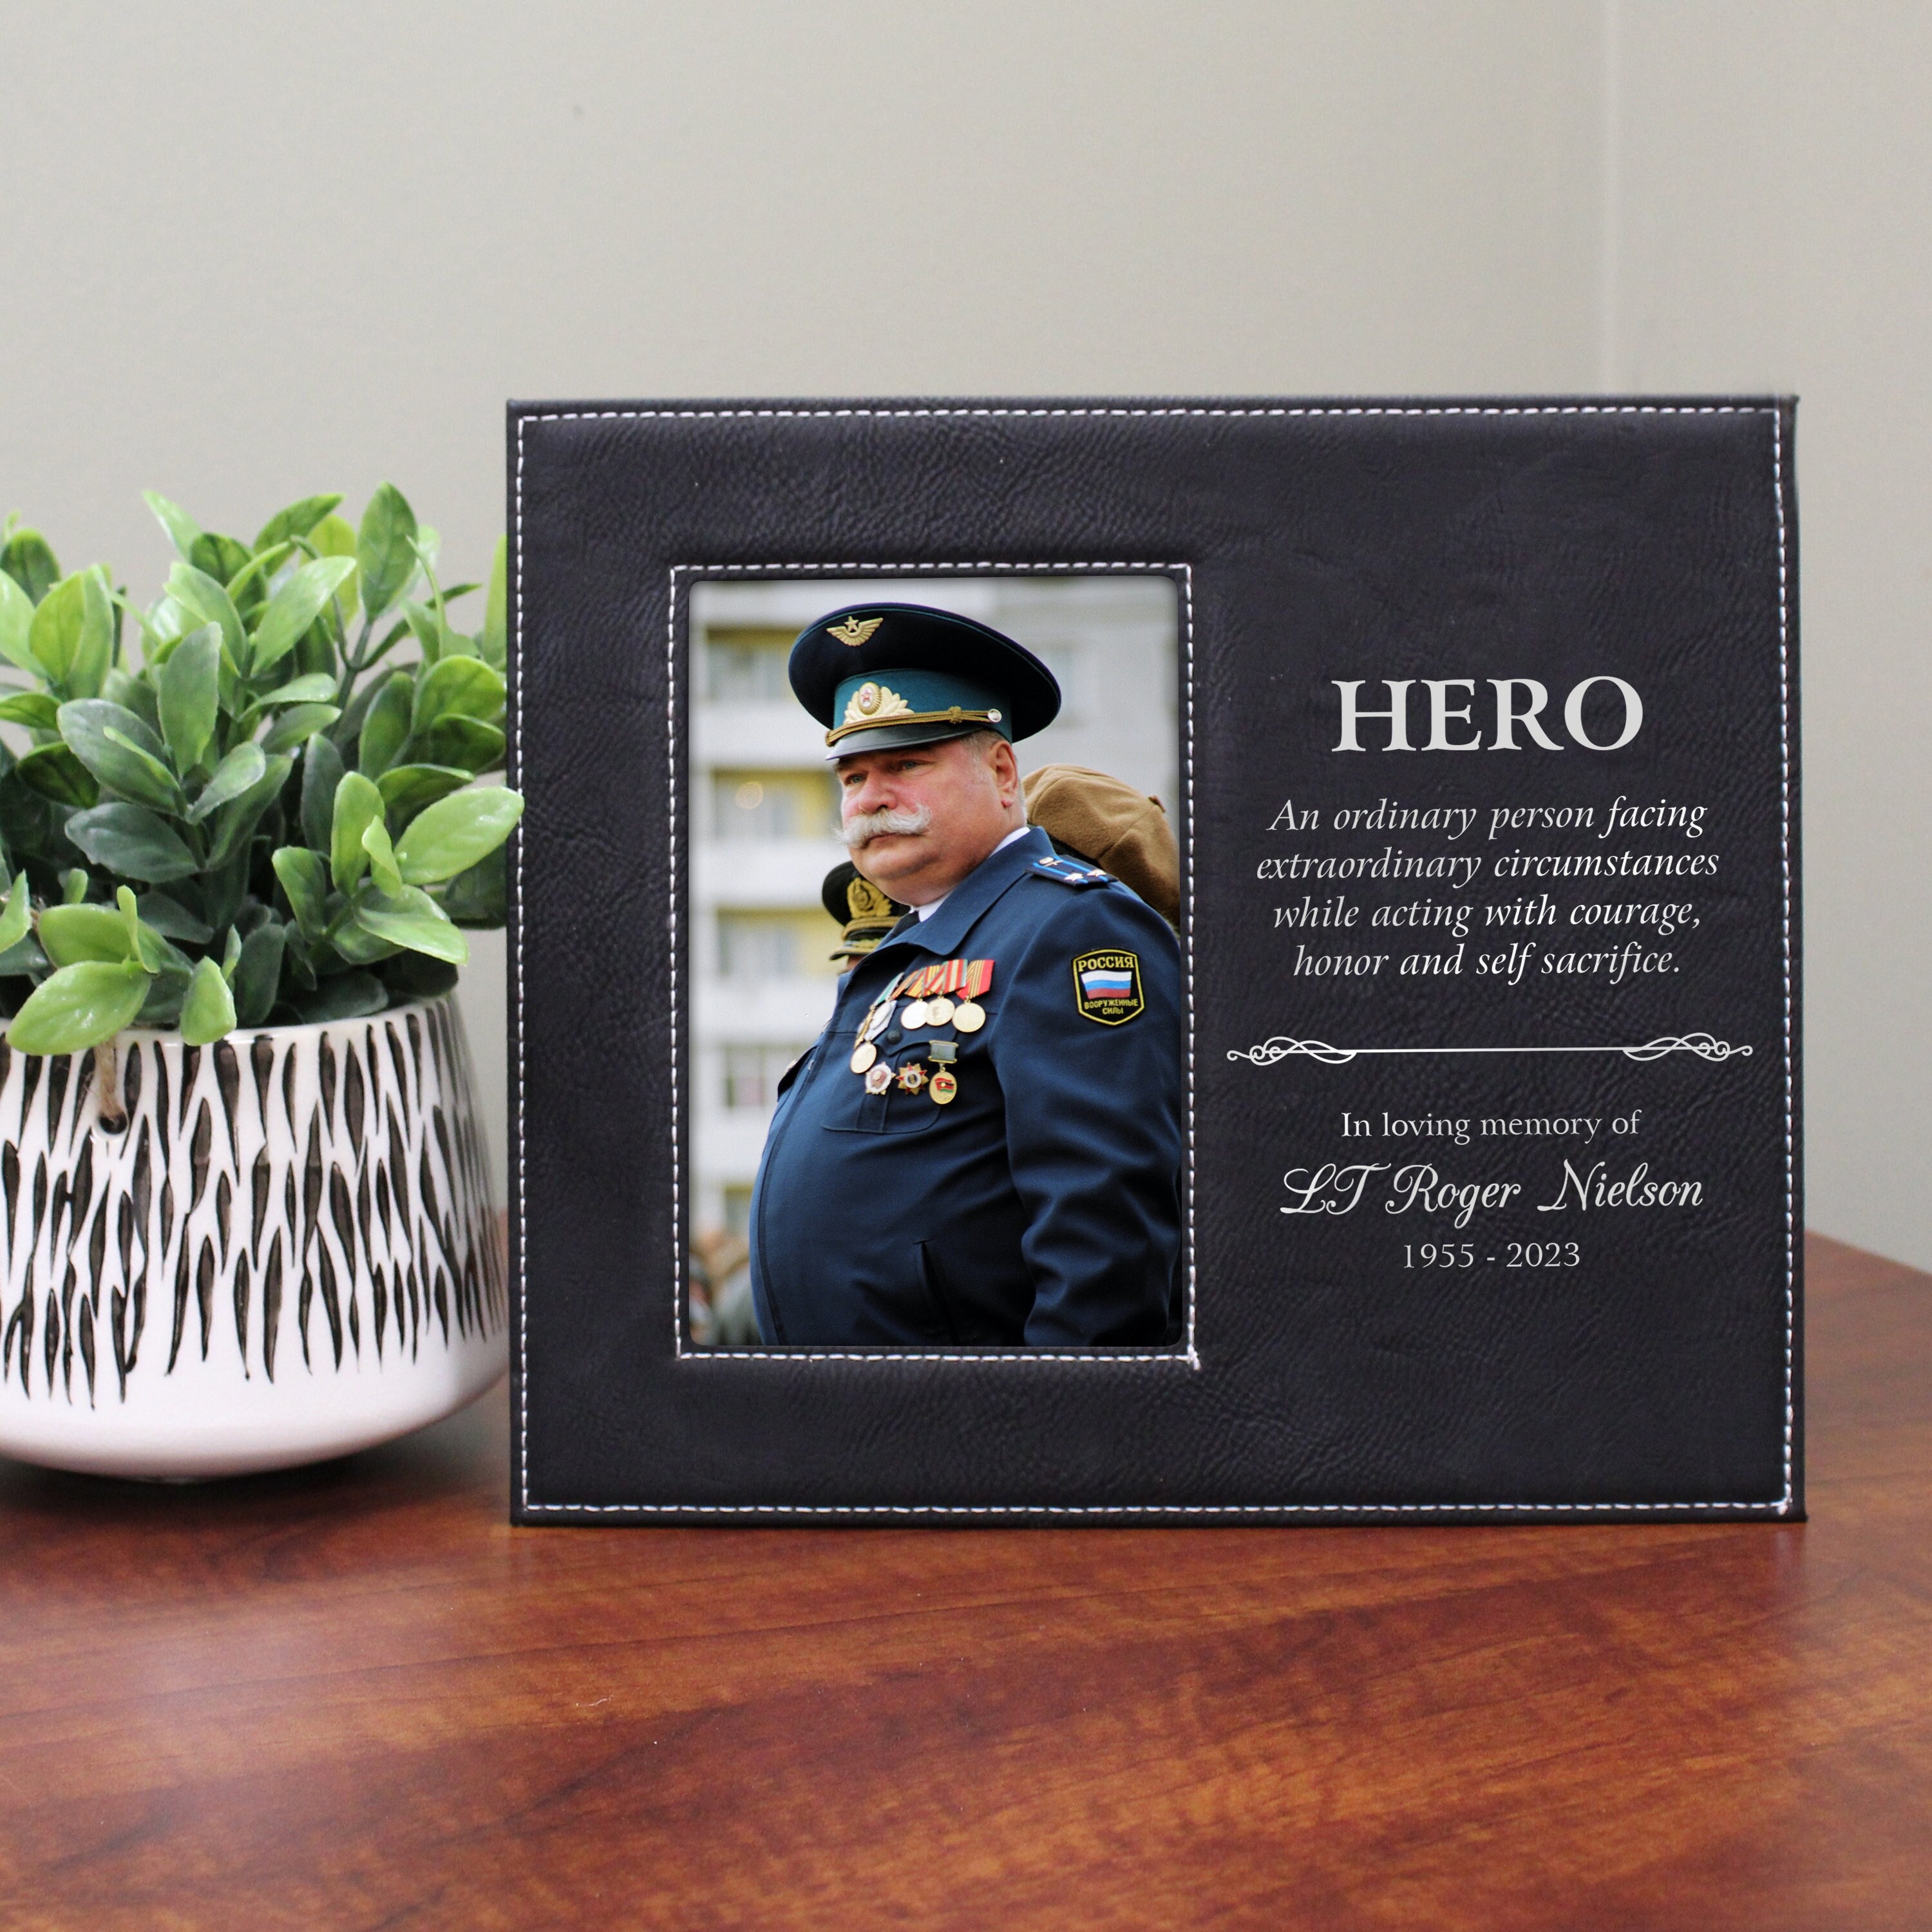 Policeman's Prayer, Personalized Picture Frame Gifts for Men Police of